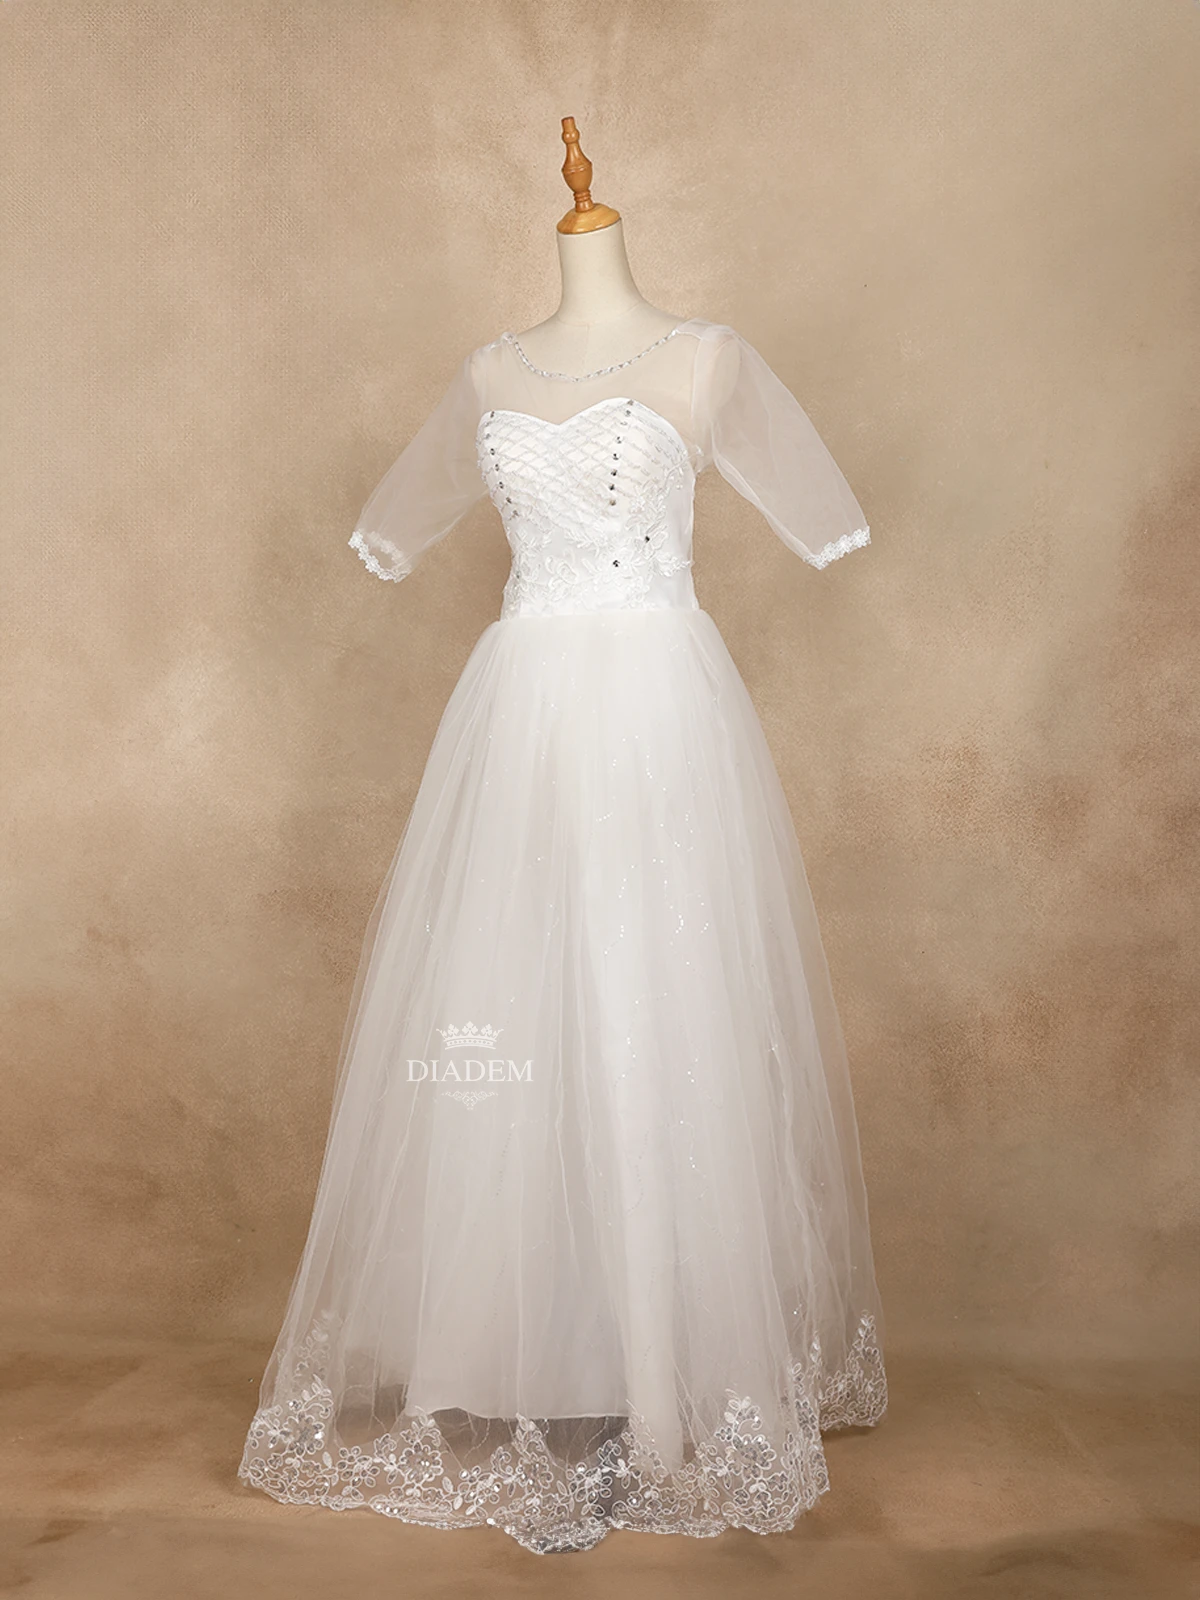 White Wedding Ball Gown Adorned In Floral Design And Laces And Stones